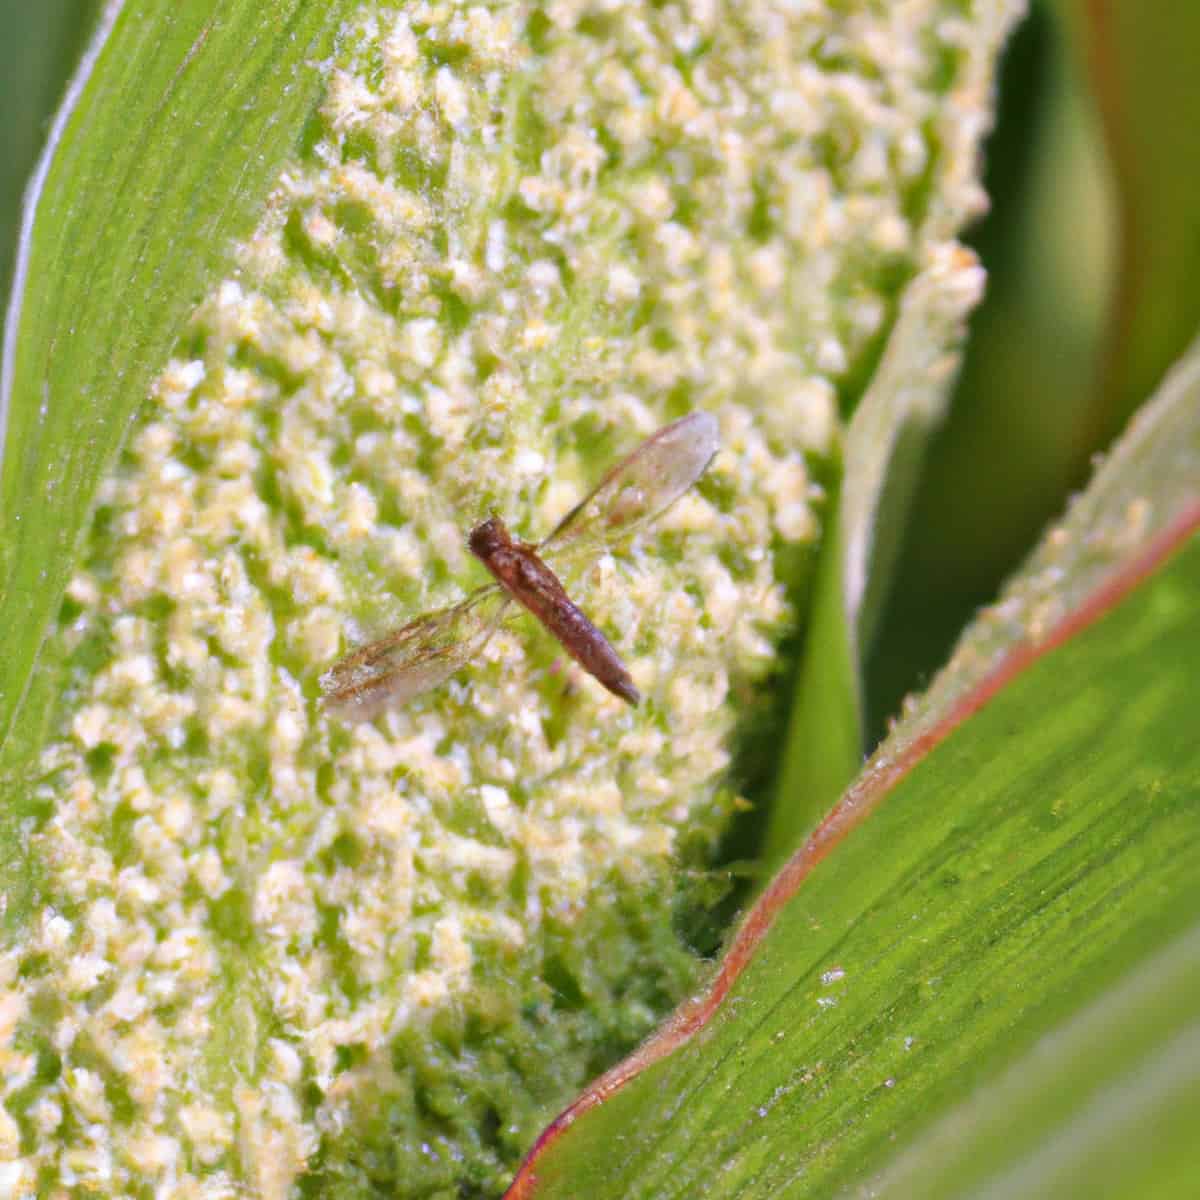 Shootfly Management in Sorghum
